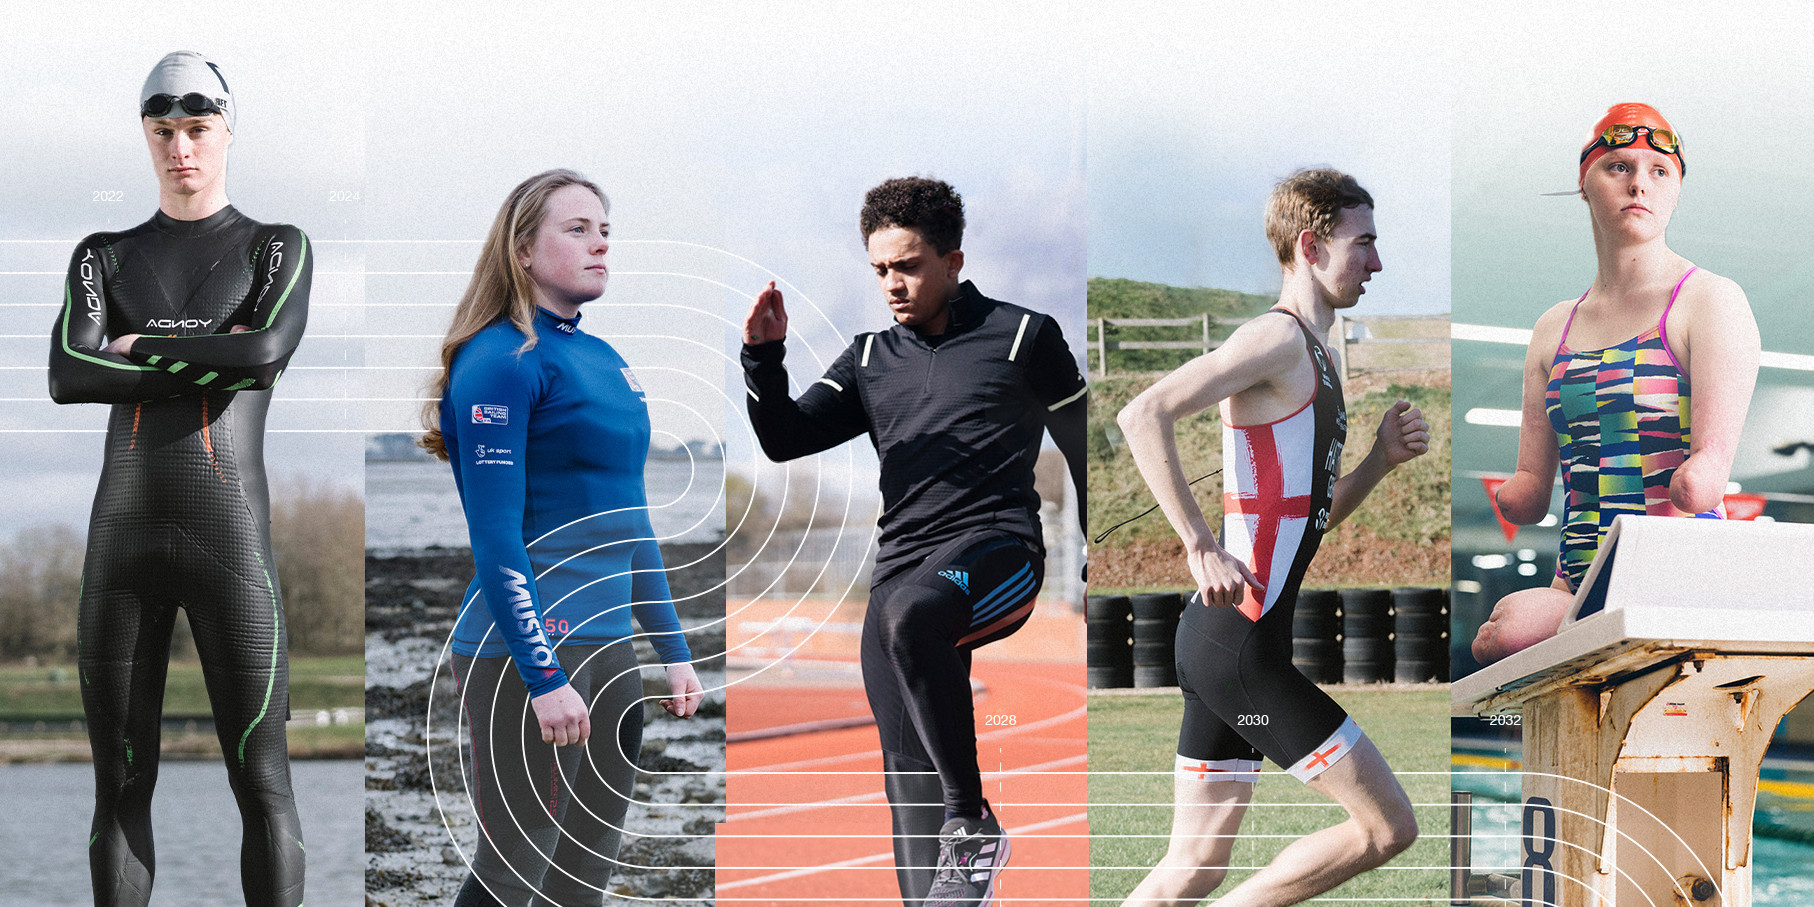 UK Sport has launched its Team of Tomorrow, featuring young athletes who have shared their concerns around the environment and are campaigning for positive change ©UK Sport